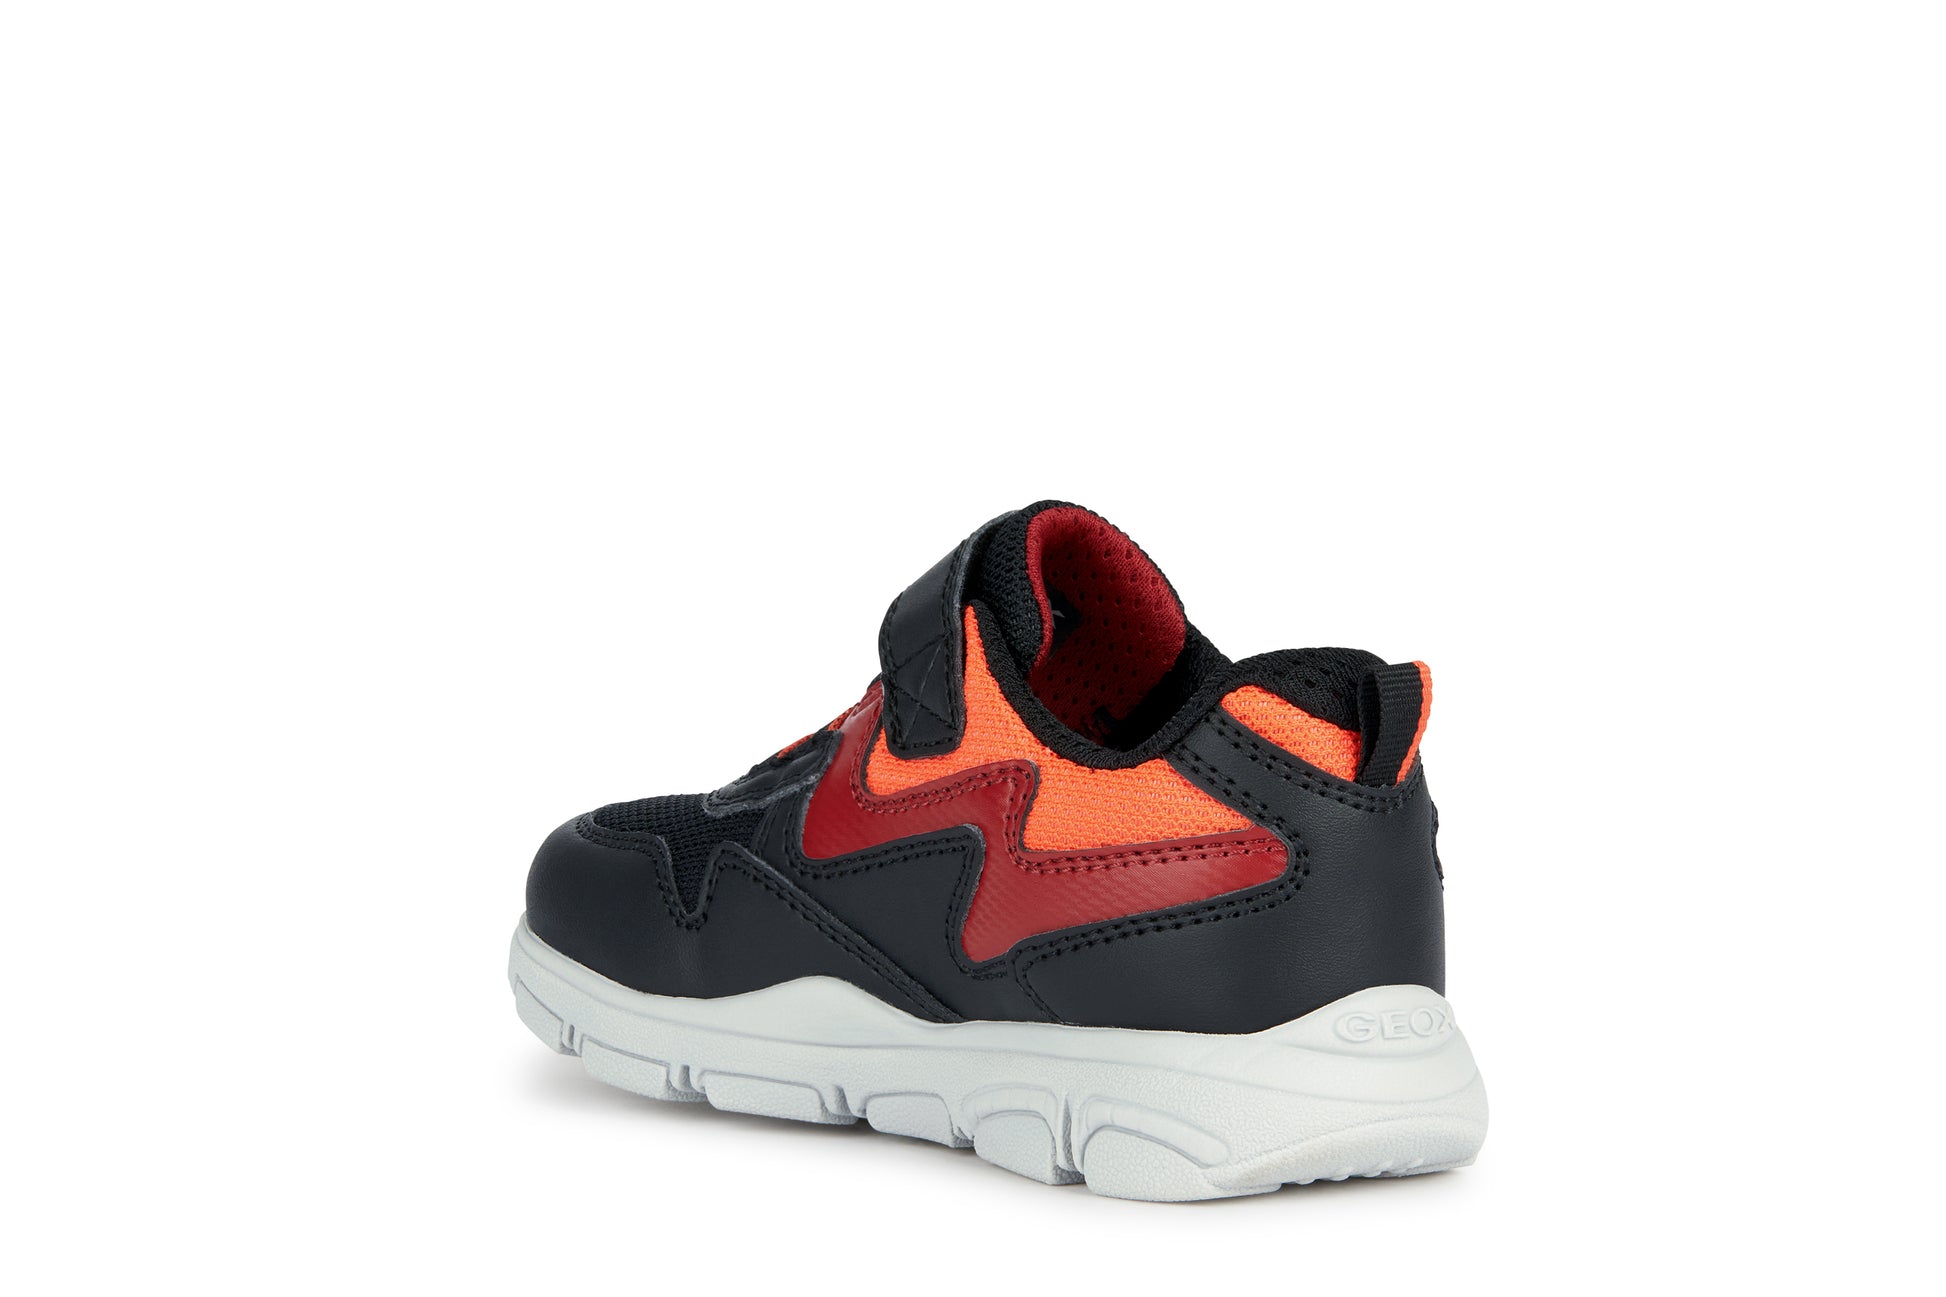 A boys trainer by Geox, style New Torque, in black, red and orange with a velcro strap and bungee laces. Rear inner side angled view.